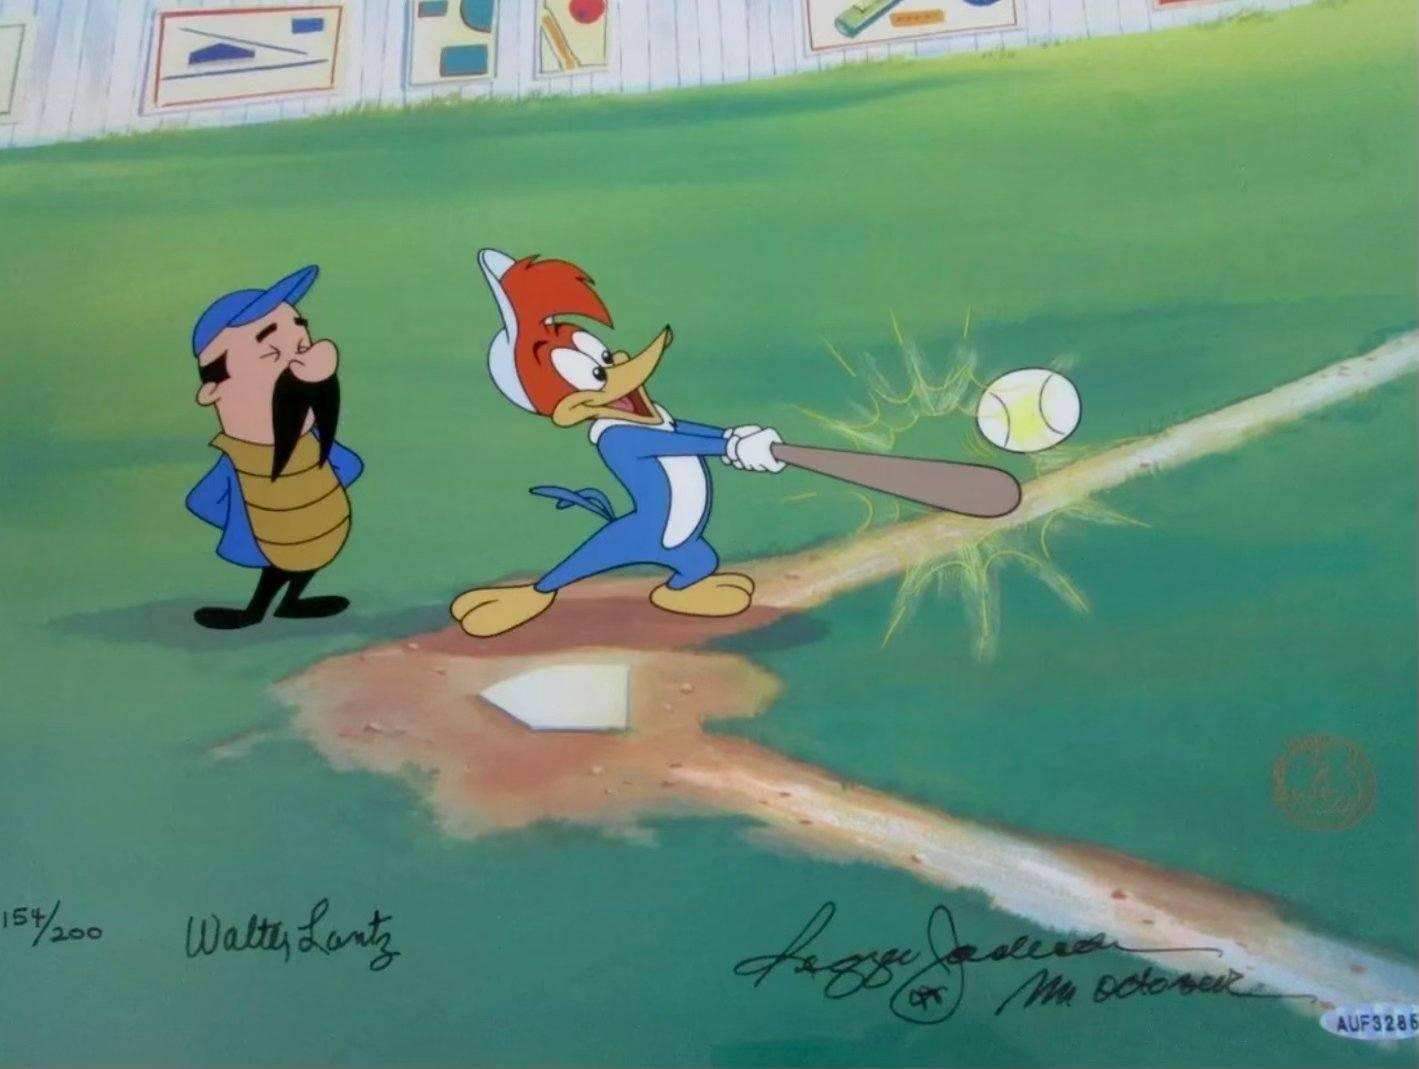 Woody Gets a Hit: Woody Woodpecker Limited Edition signed by Reggie Jackson